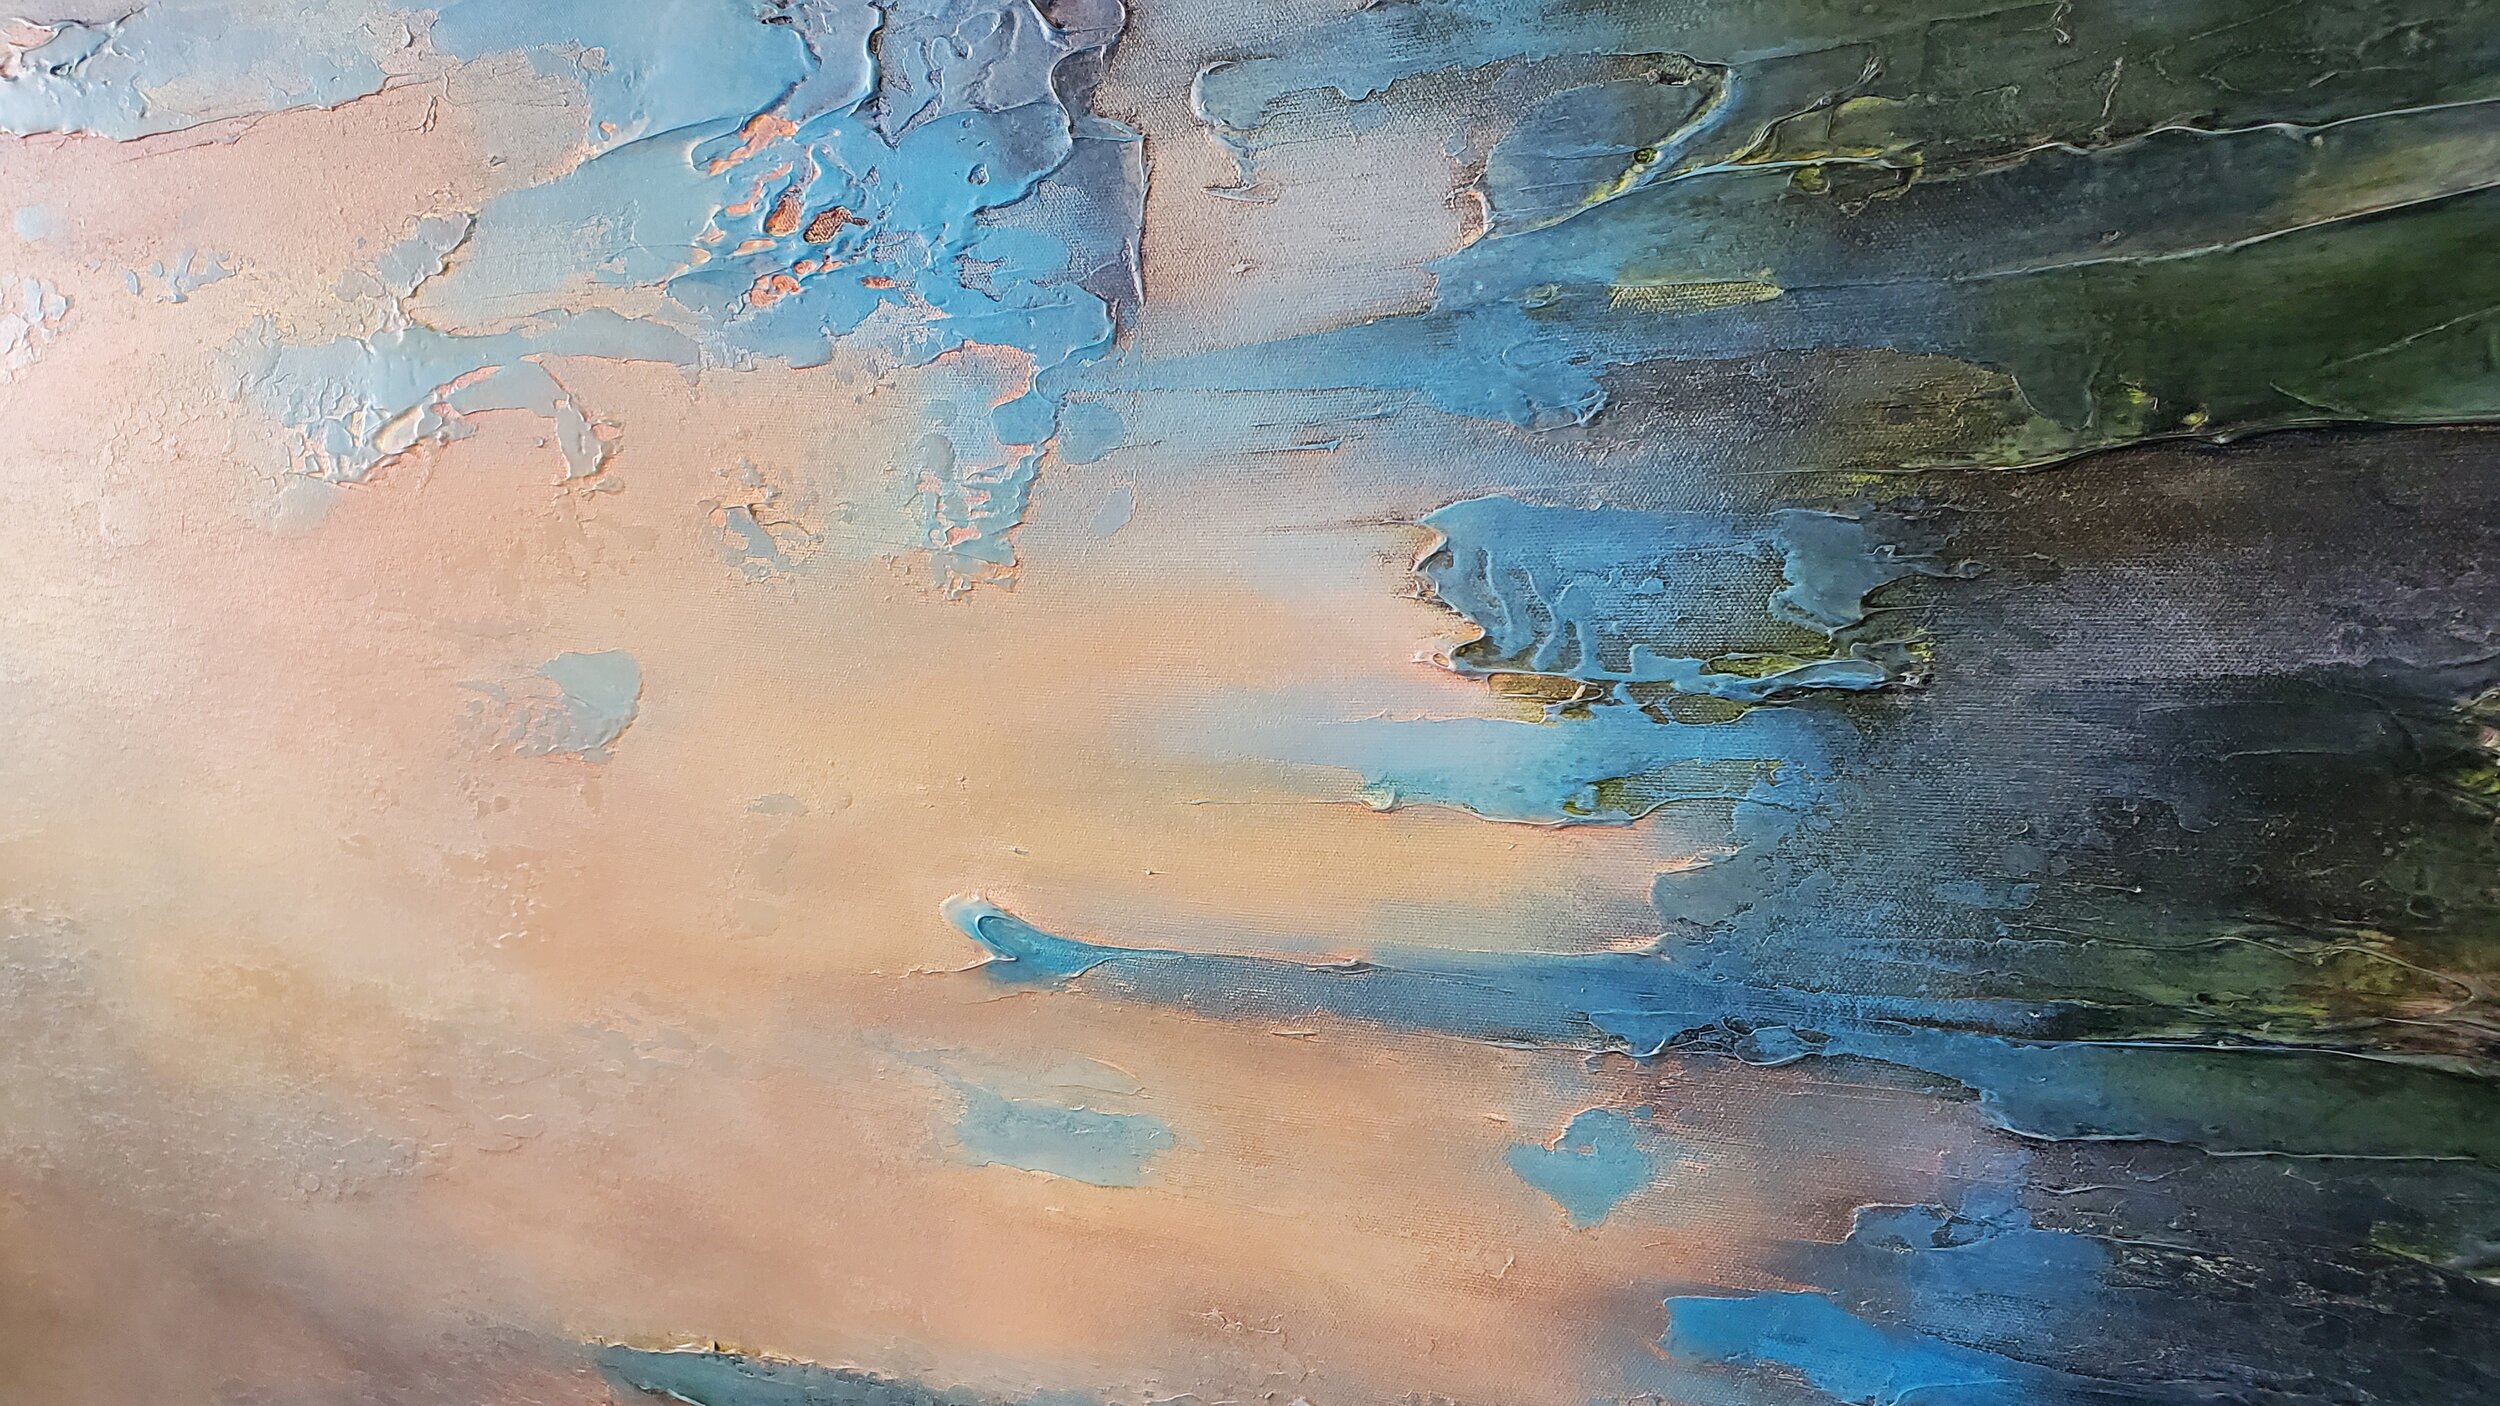  Painting #7 Leap- Vancouver abstract painter, Donna Giraud has eleven new available artworks for sale in her 2020 solo art exhibition titled, Lost and Found. Her large scale, abstract, textural artworks are perfect for any interior design aesthetic 